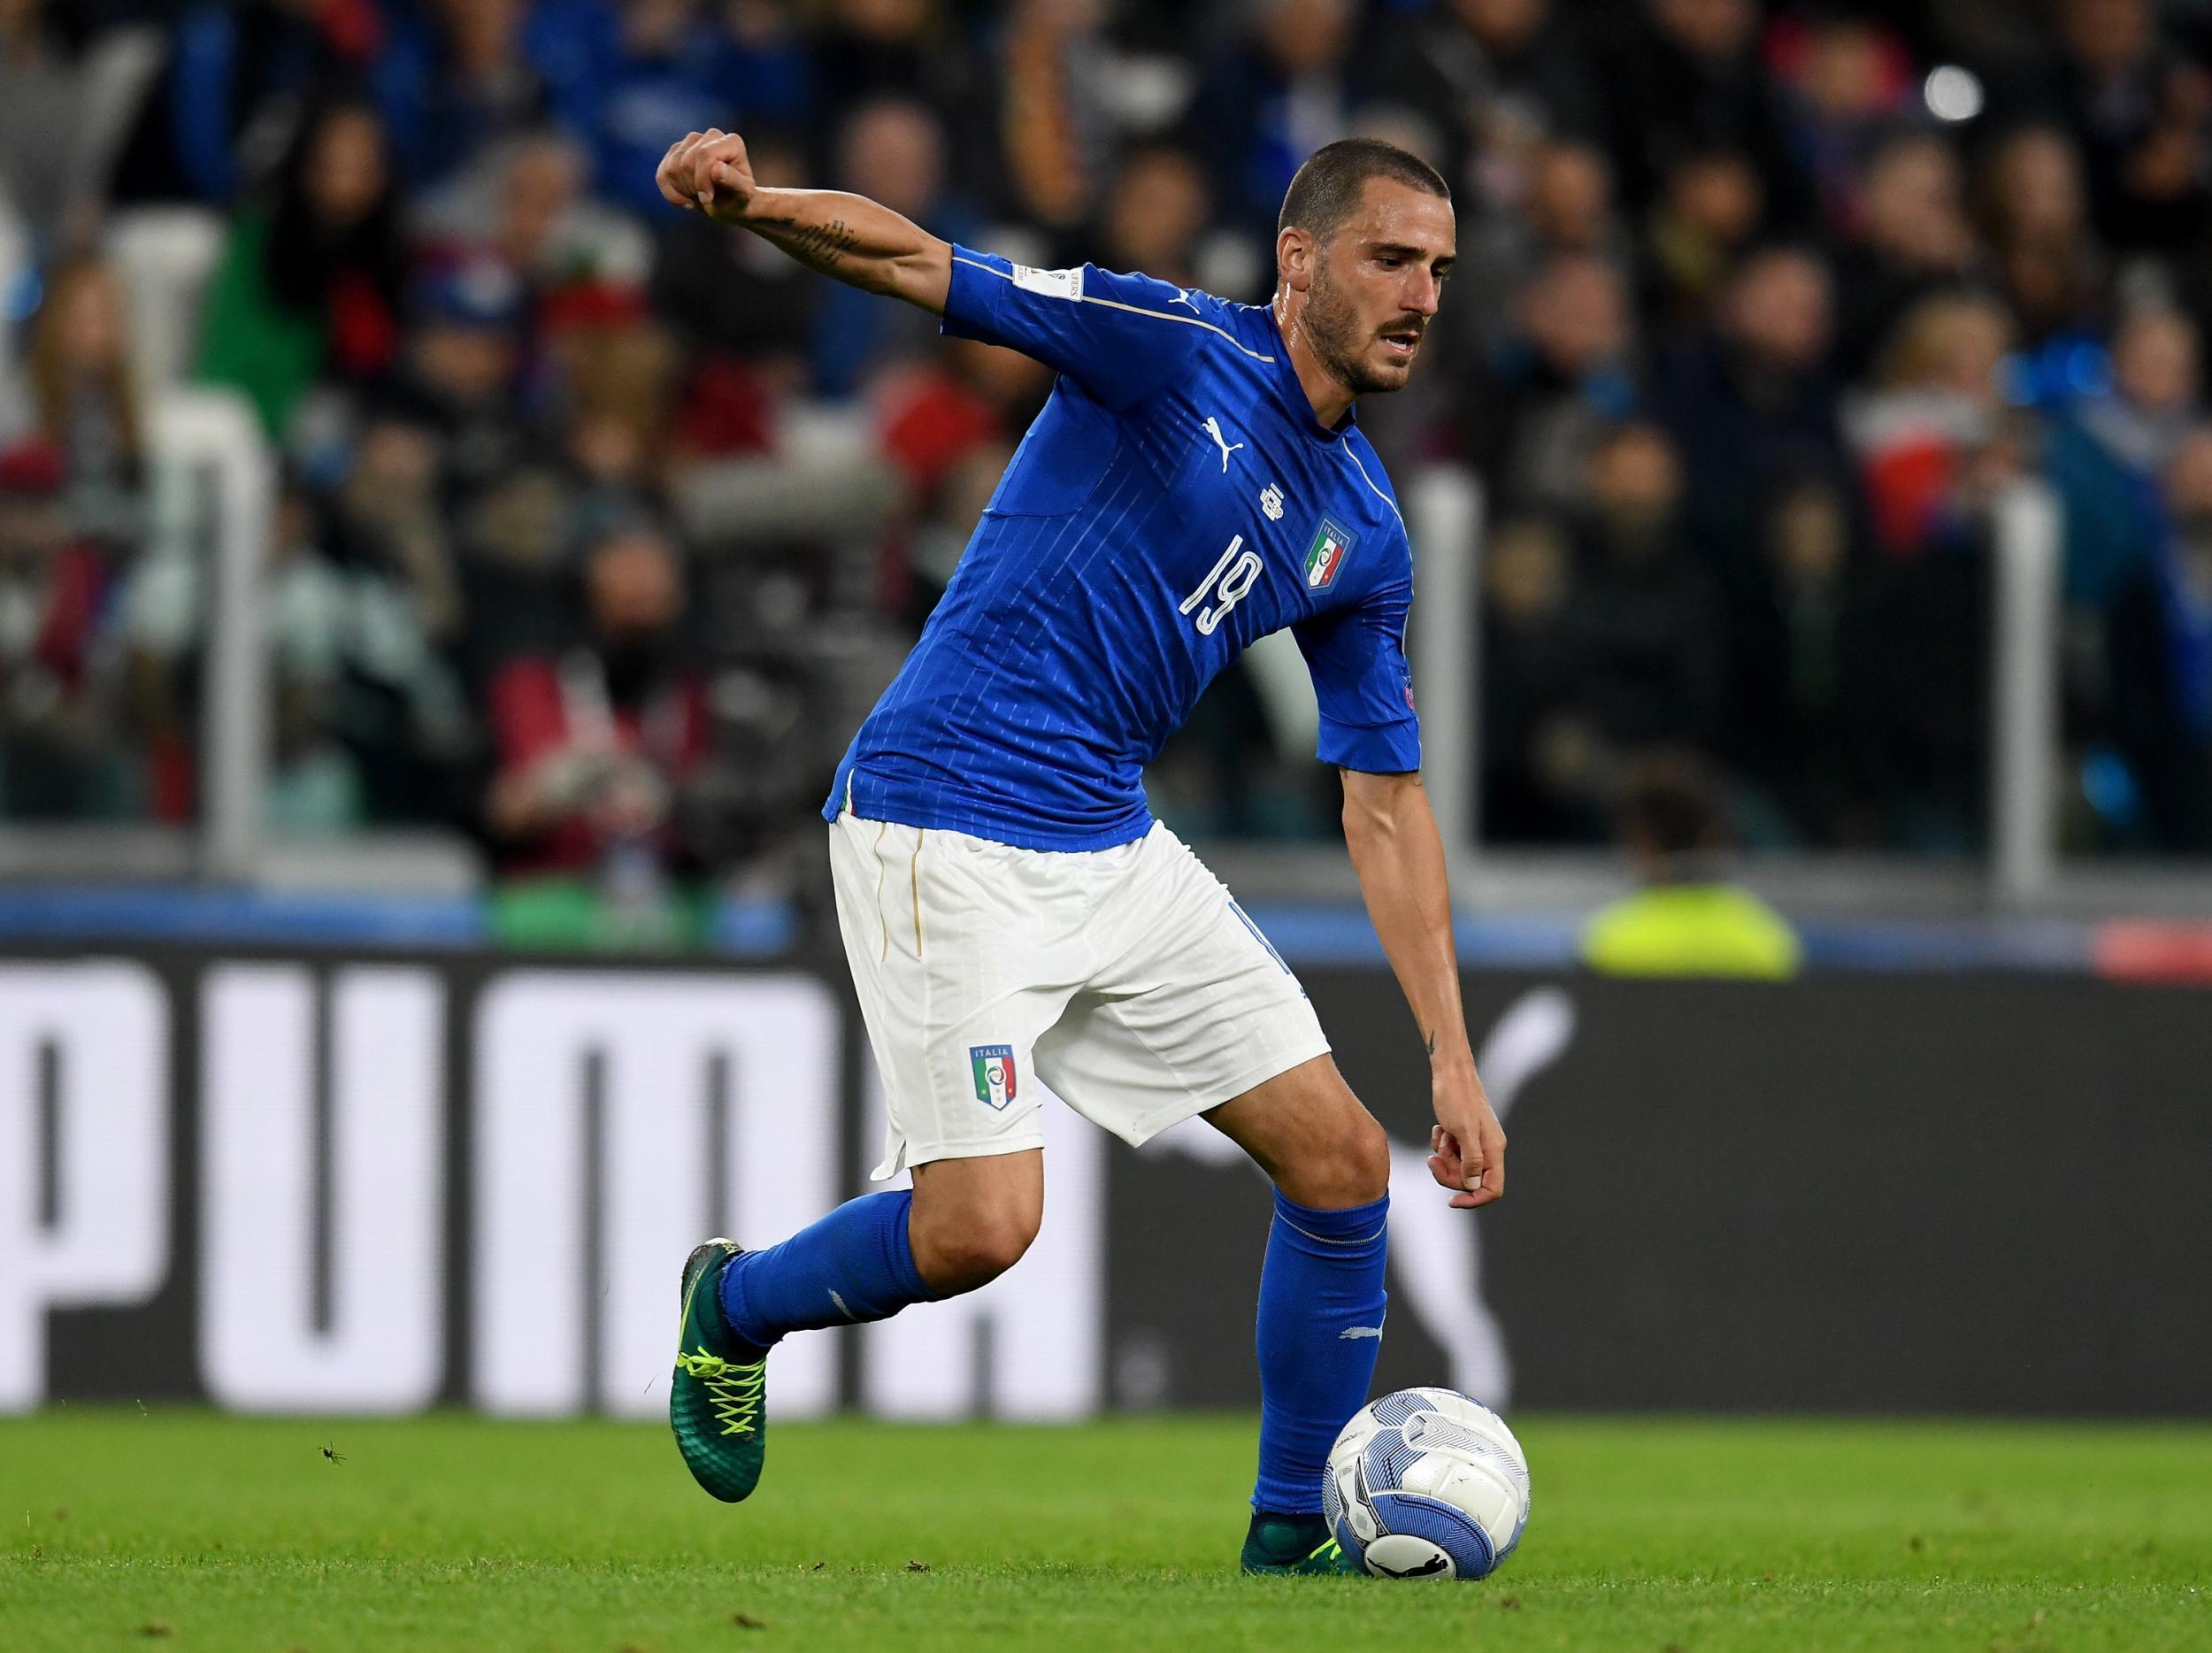 Antonio Conte knows Bonucci well from his time with Italy and Juventus